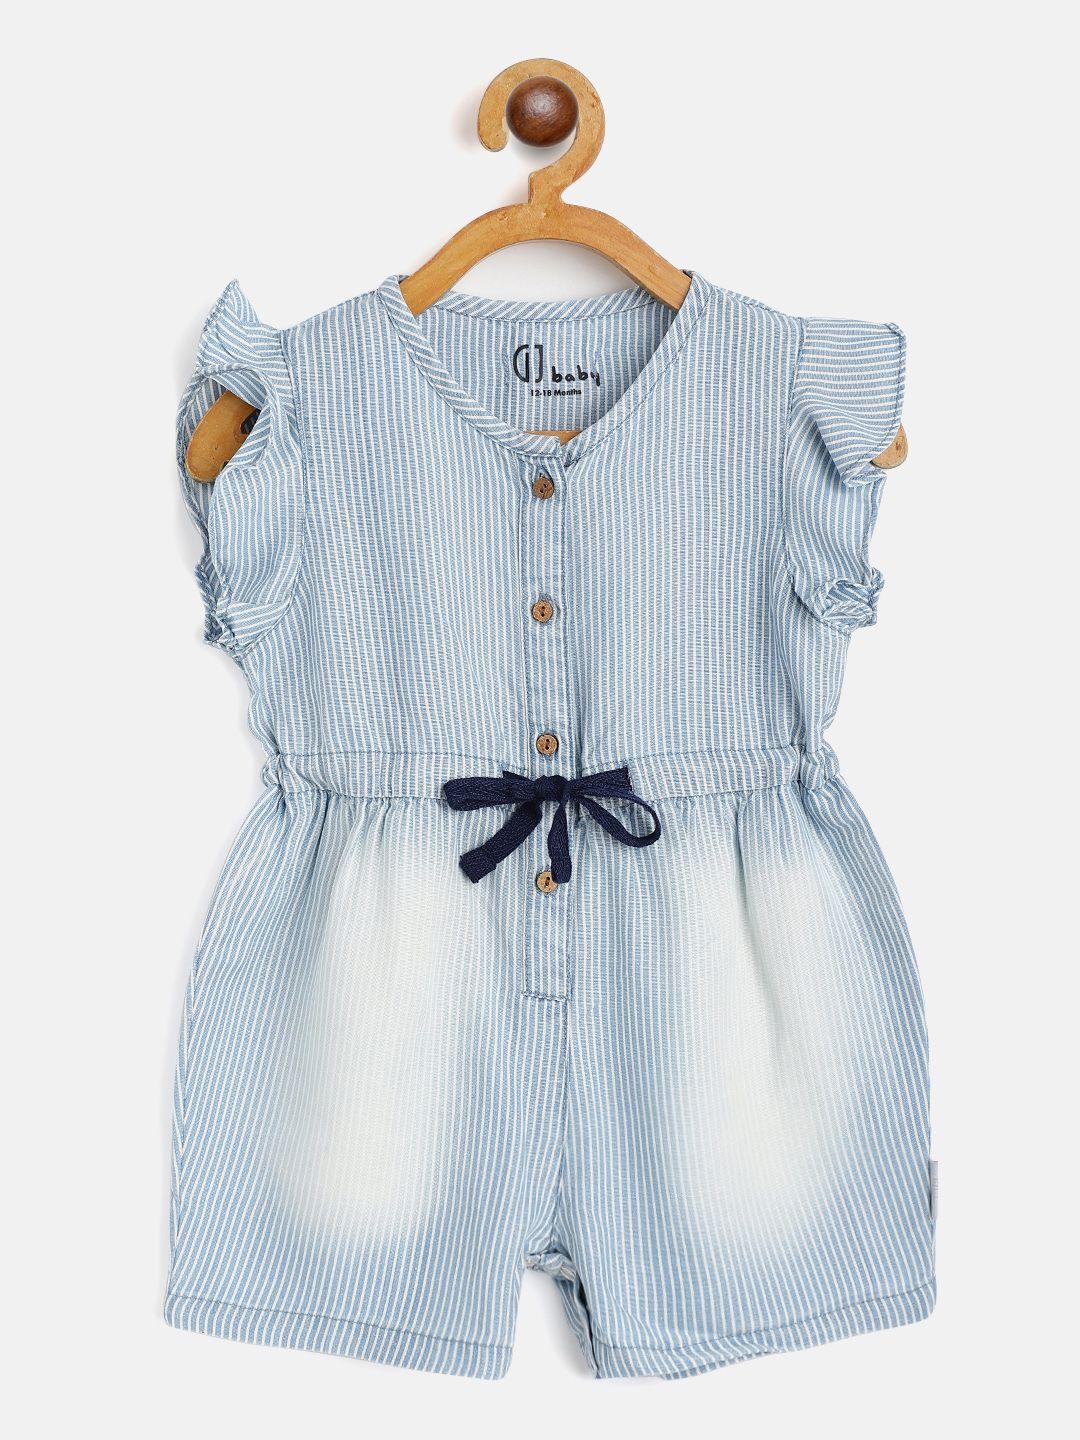 gini and jony infant girls blue & white striped rompers